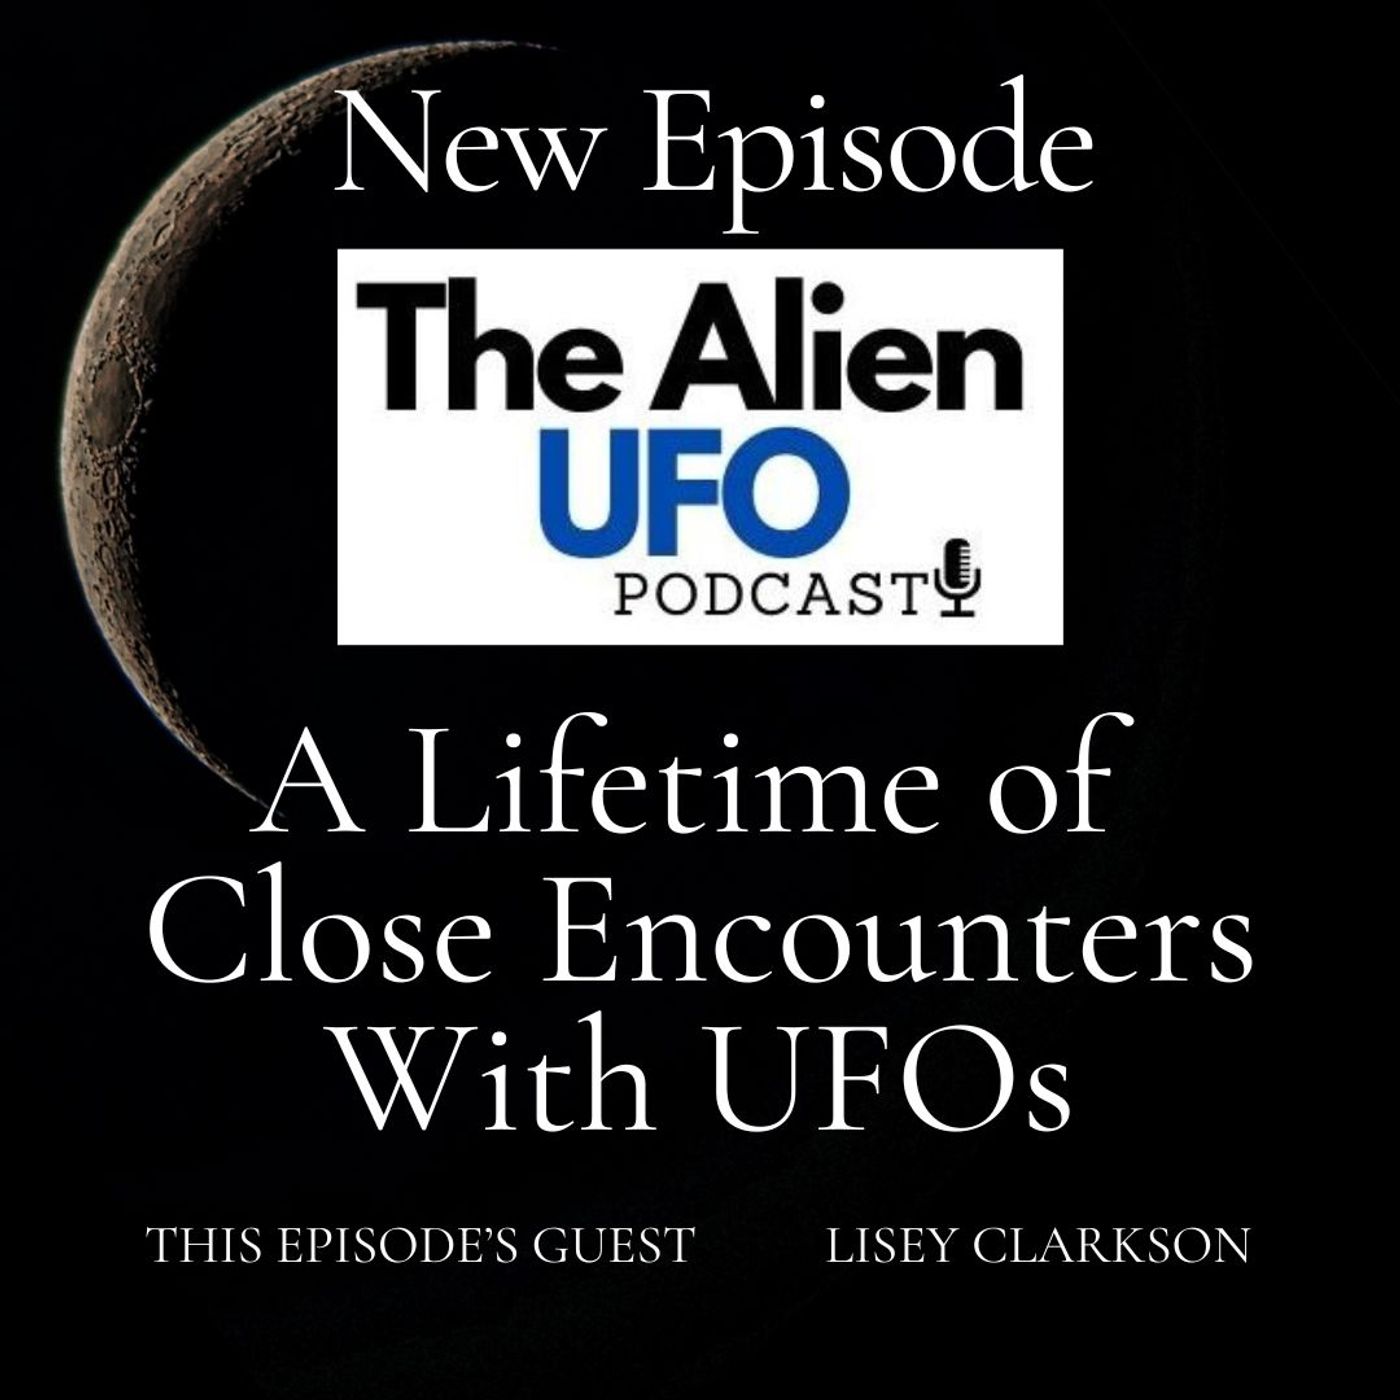 A Lifetime of Close Encounters With UFOs